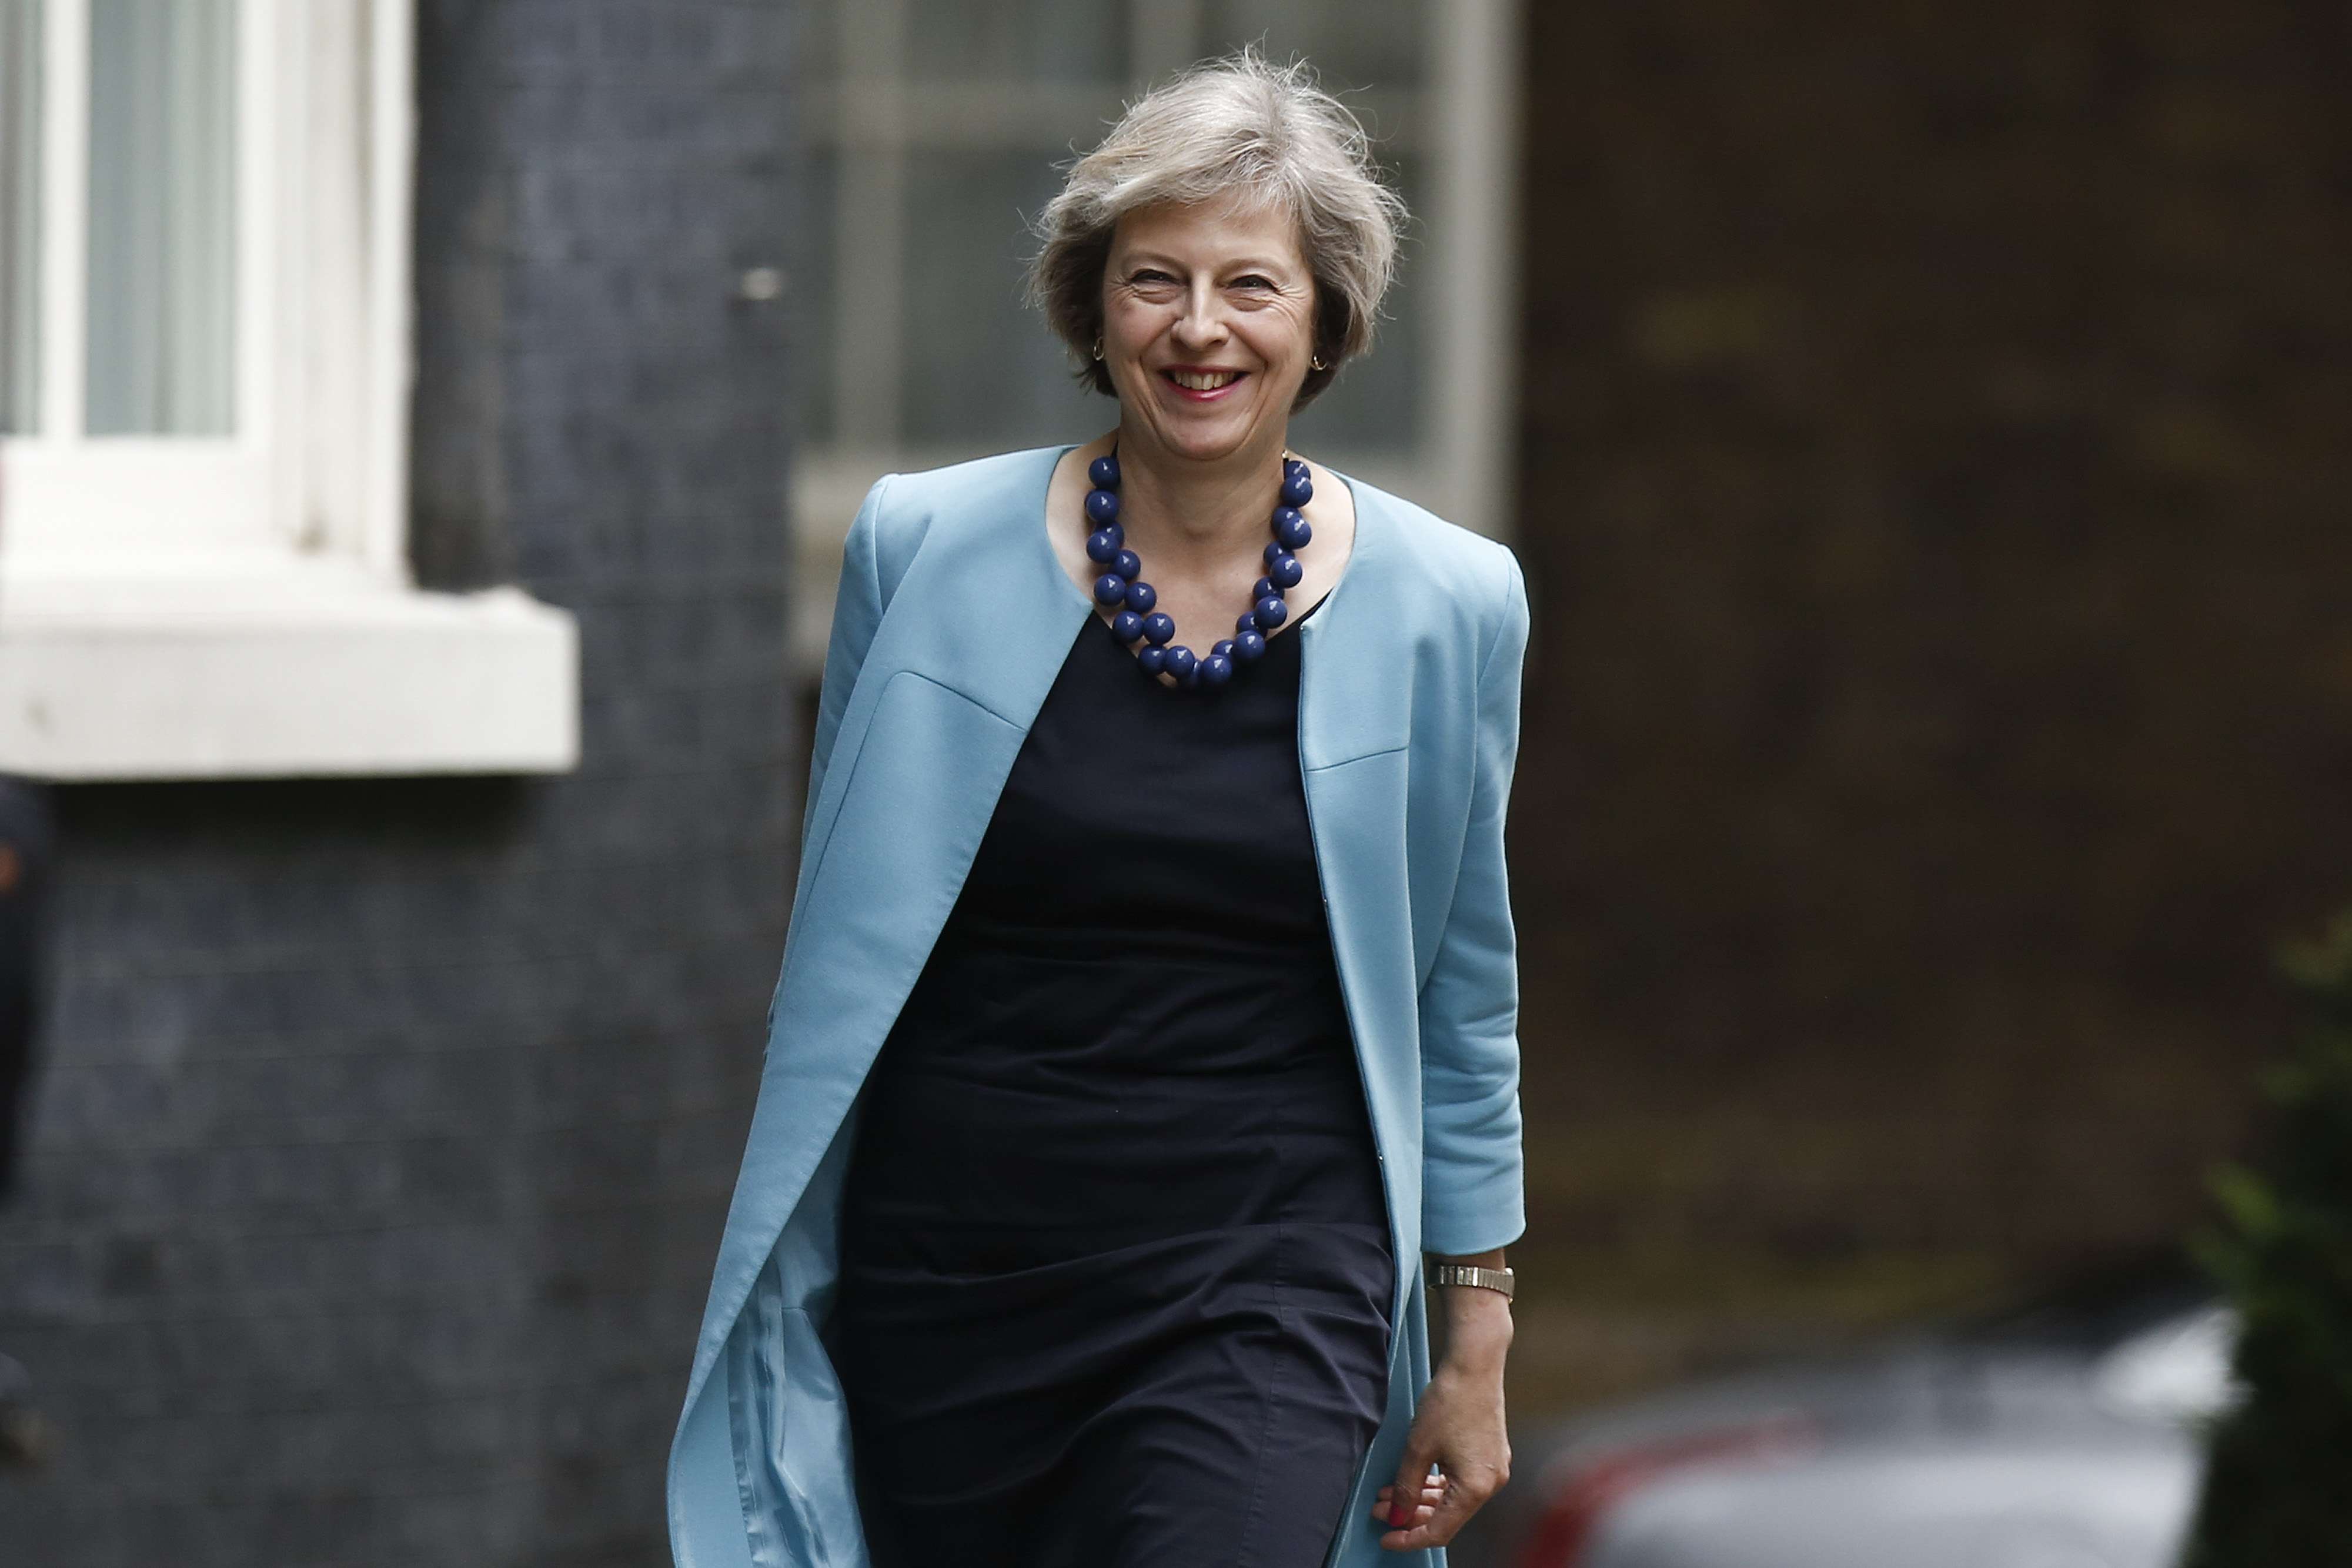 Theresa May has pledged to make Britain work “not just for a privileged few, but for every one of us”. Photo: Bloomberg